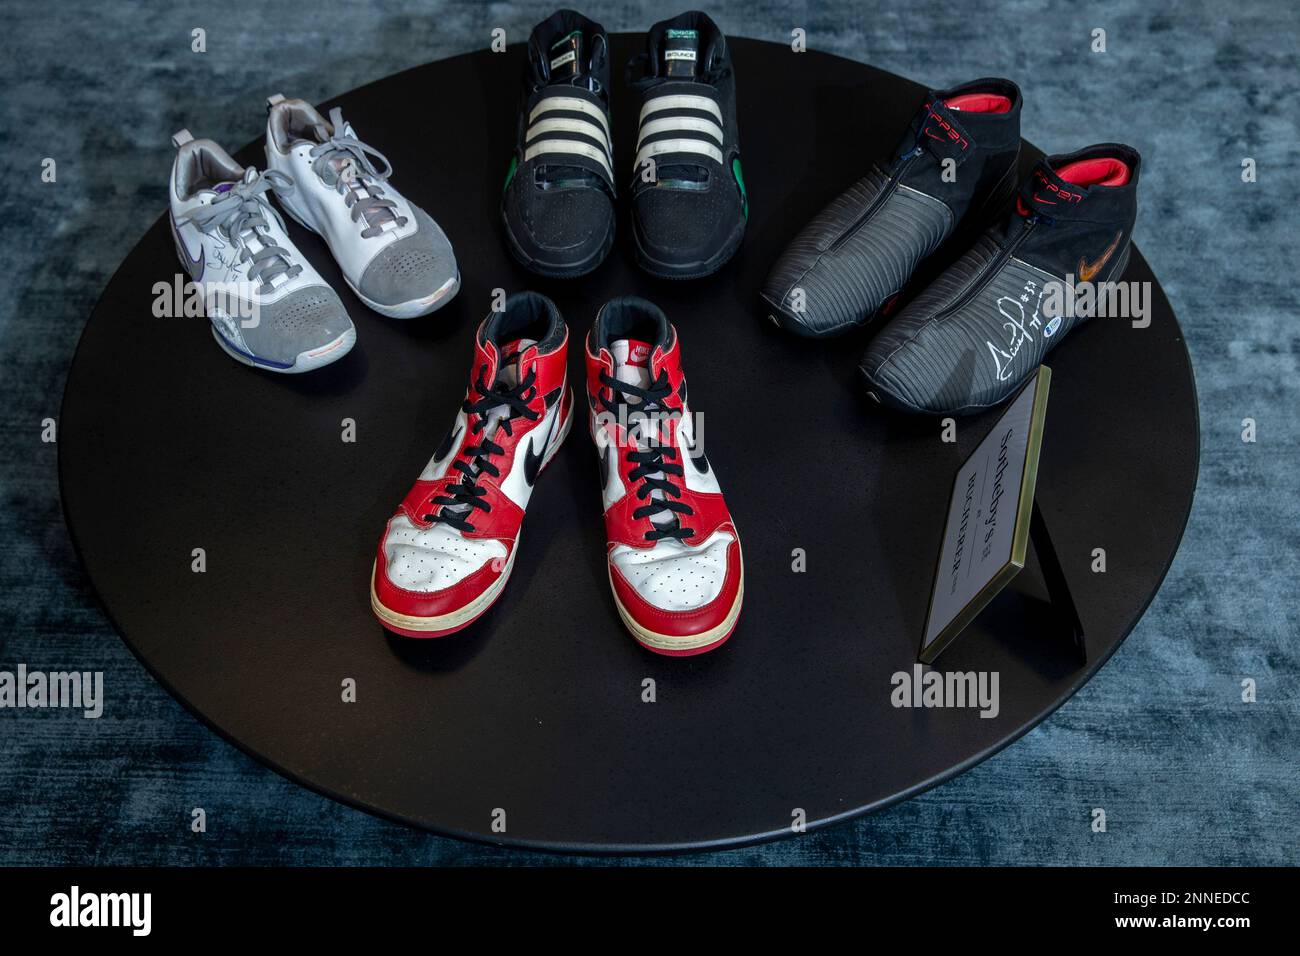 Sample Air Jordan 1s, center, worn by former NBA basketball player Michael  Jordan in 1985 are displayed with game worn Zoom BB from Steve Nash, top  left, TS Bounce Commander from Kevin